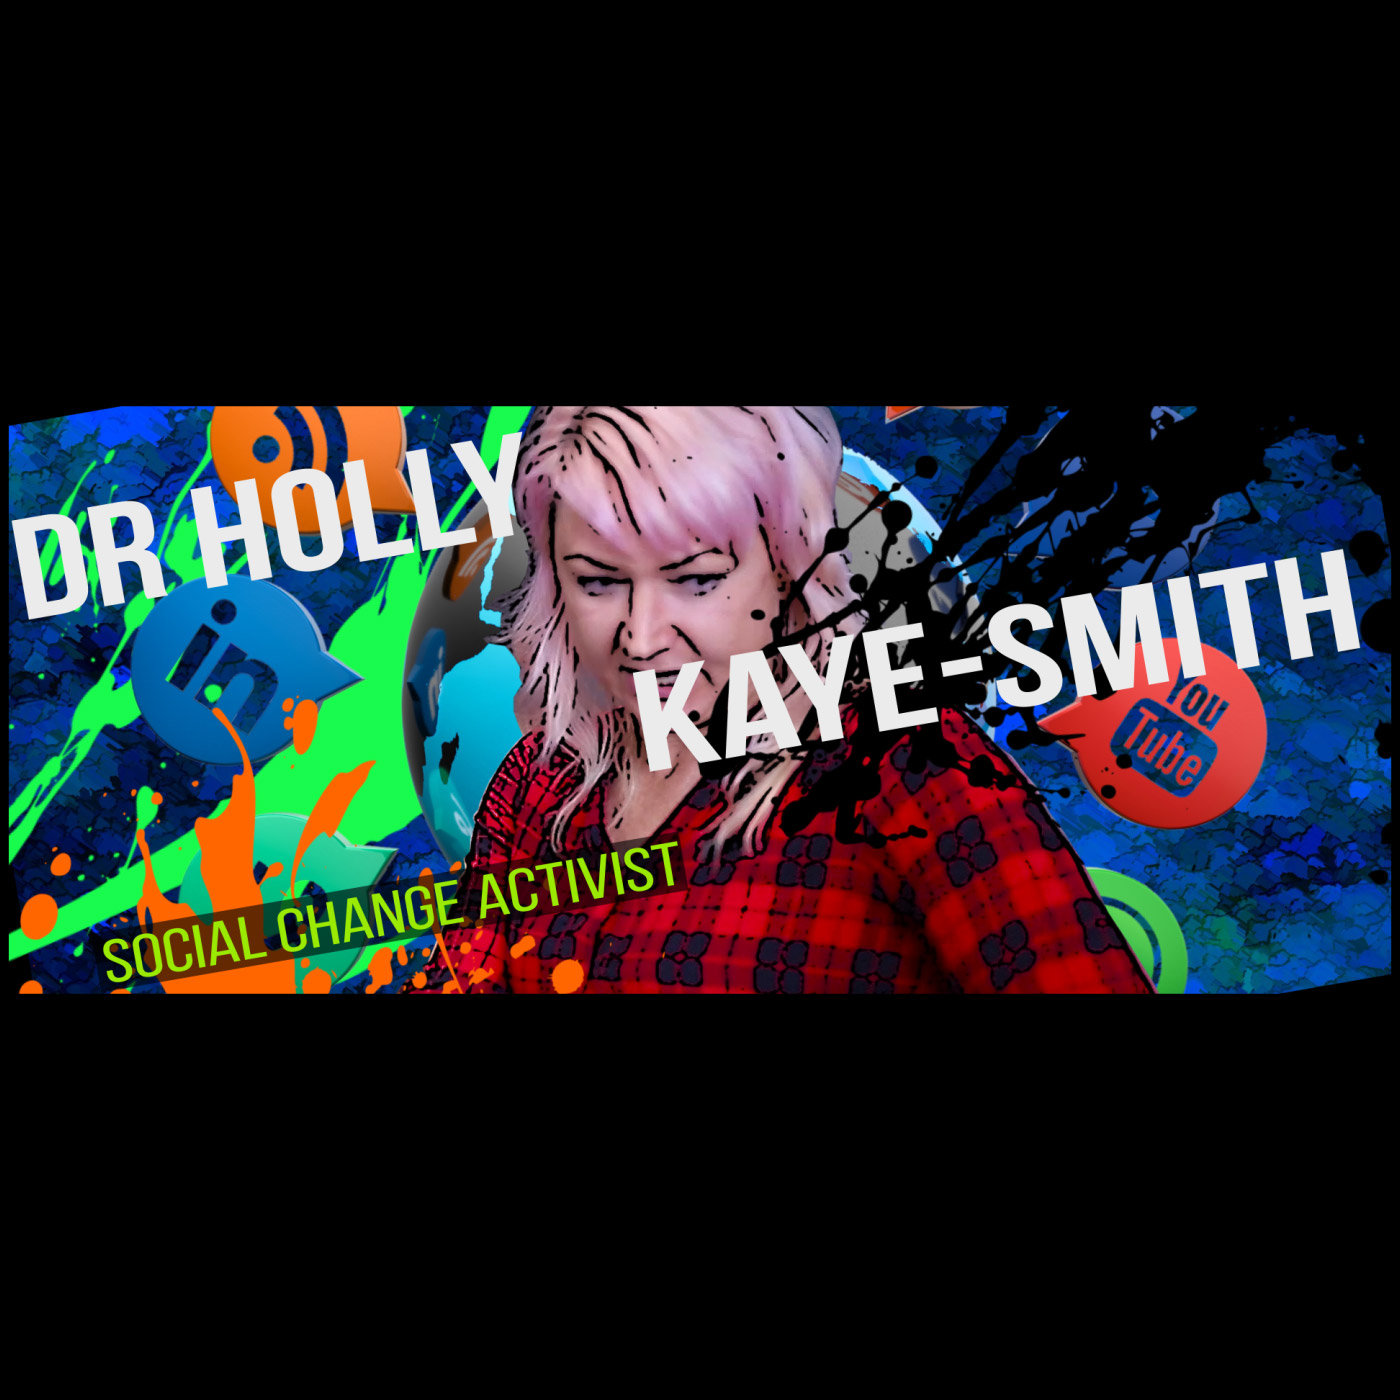 4.6 Creating Social Change with Dr Holly Kaye-Smith